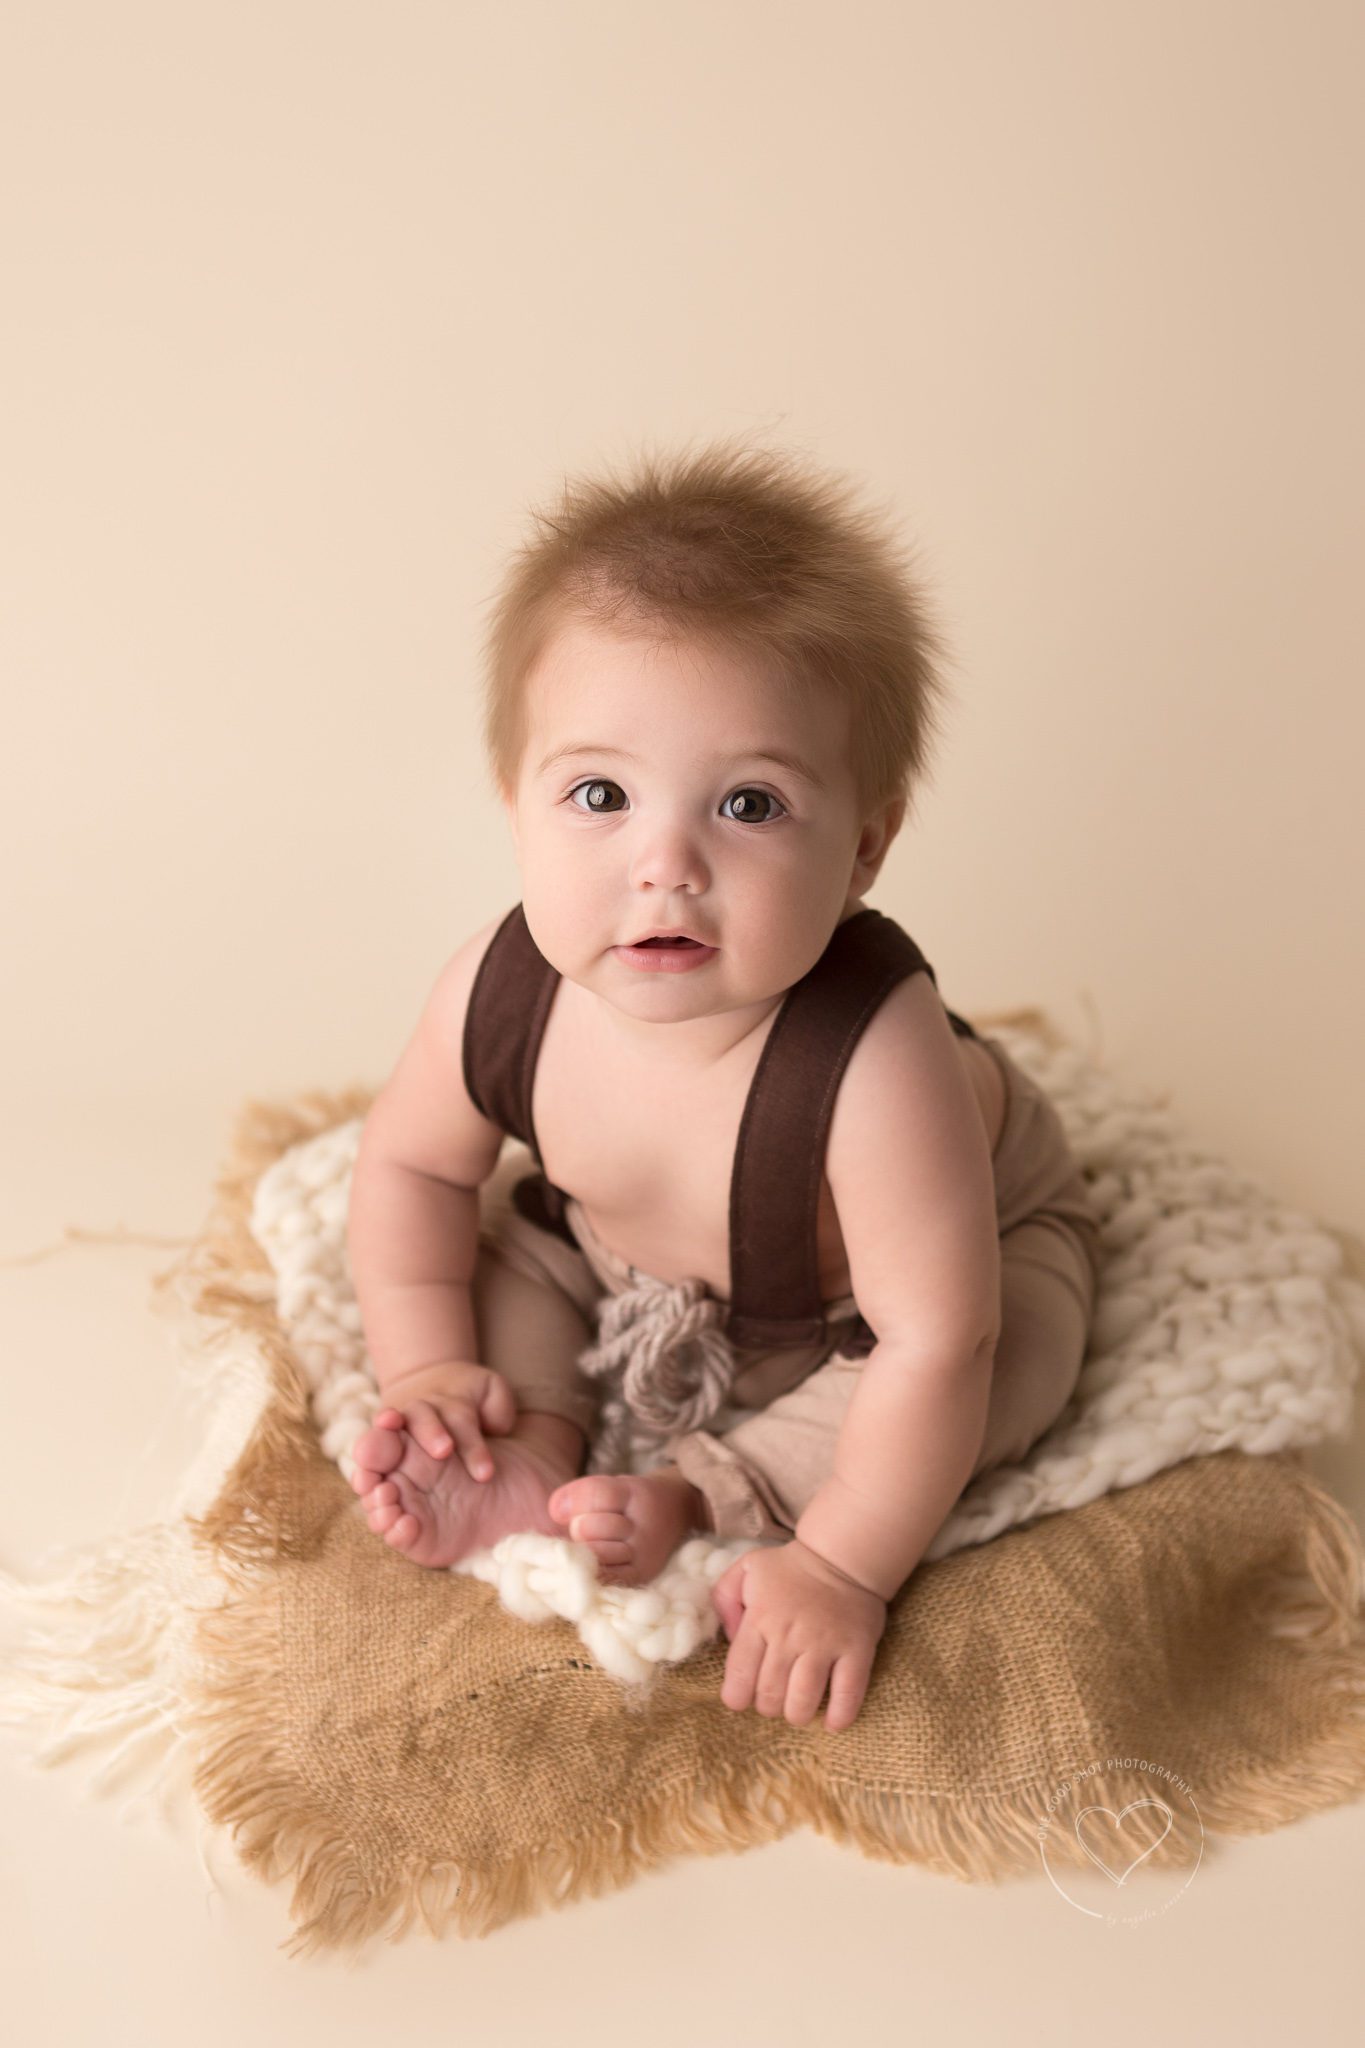 baby boy, 6 months old, sitter, wearing brown coveralls, sitting in bowl, neutral layers. Fresno baby photographer